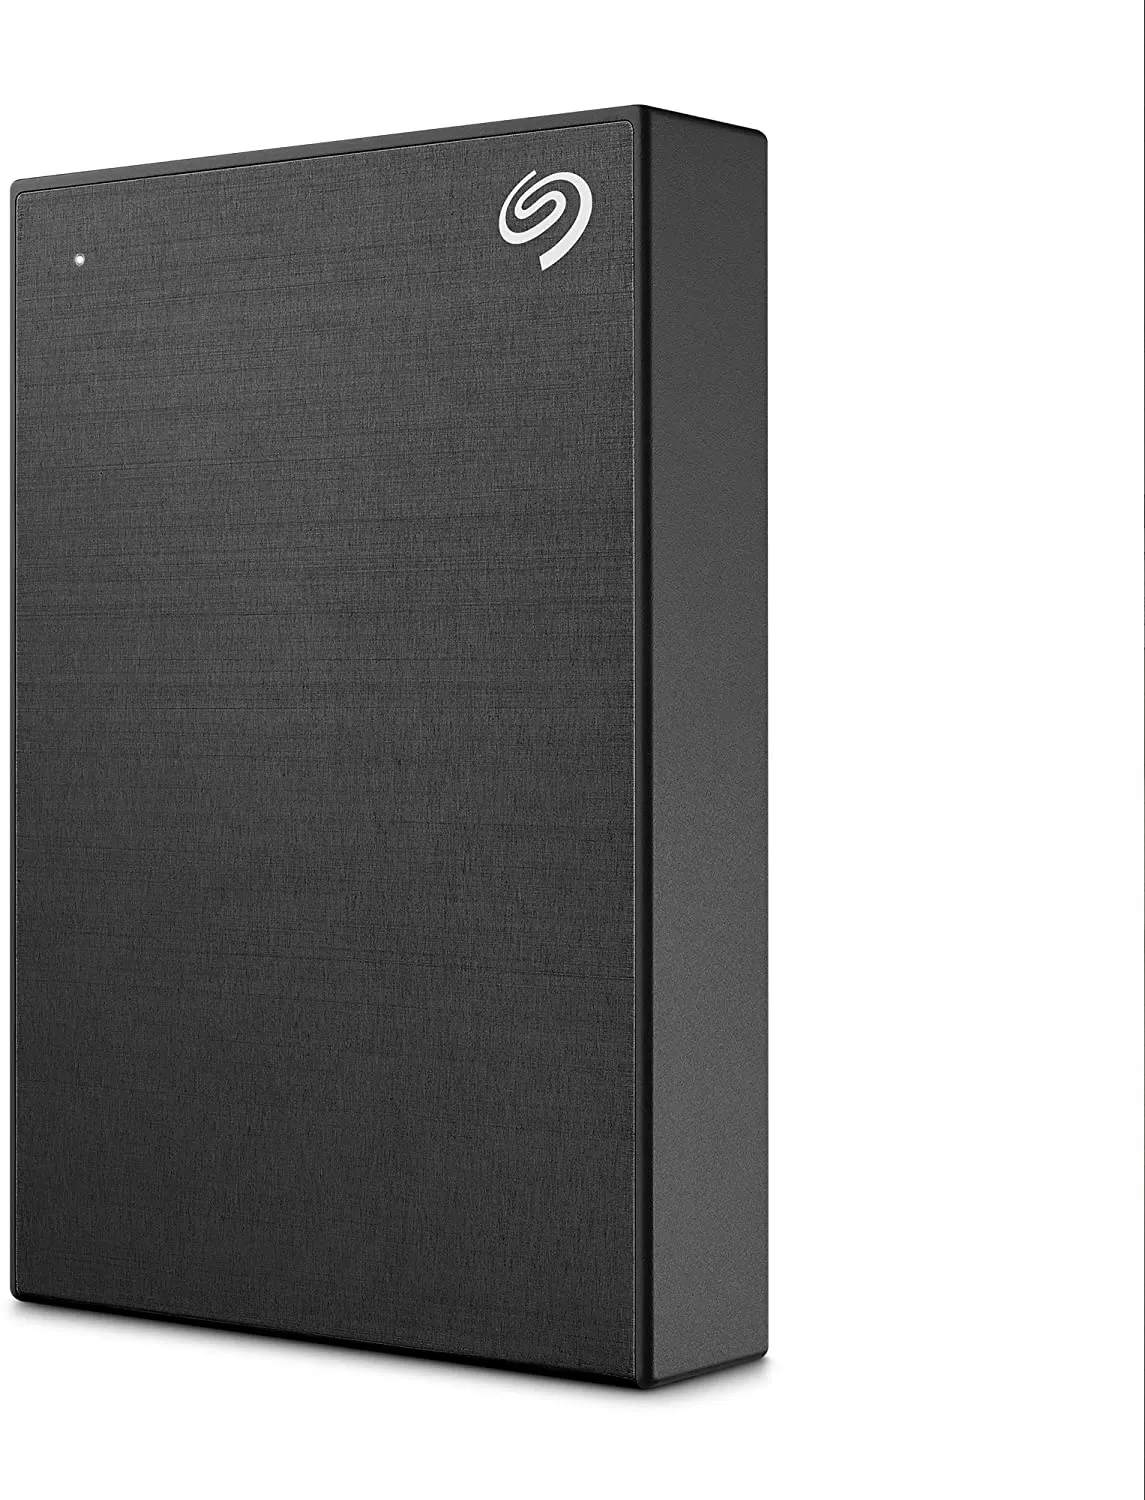 Hard Disk Extern Seagate One Touch 4TB USB 3.0 Black